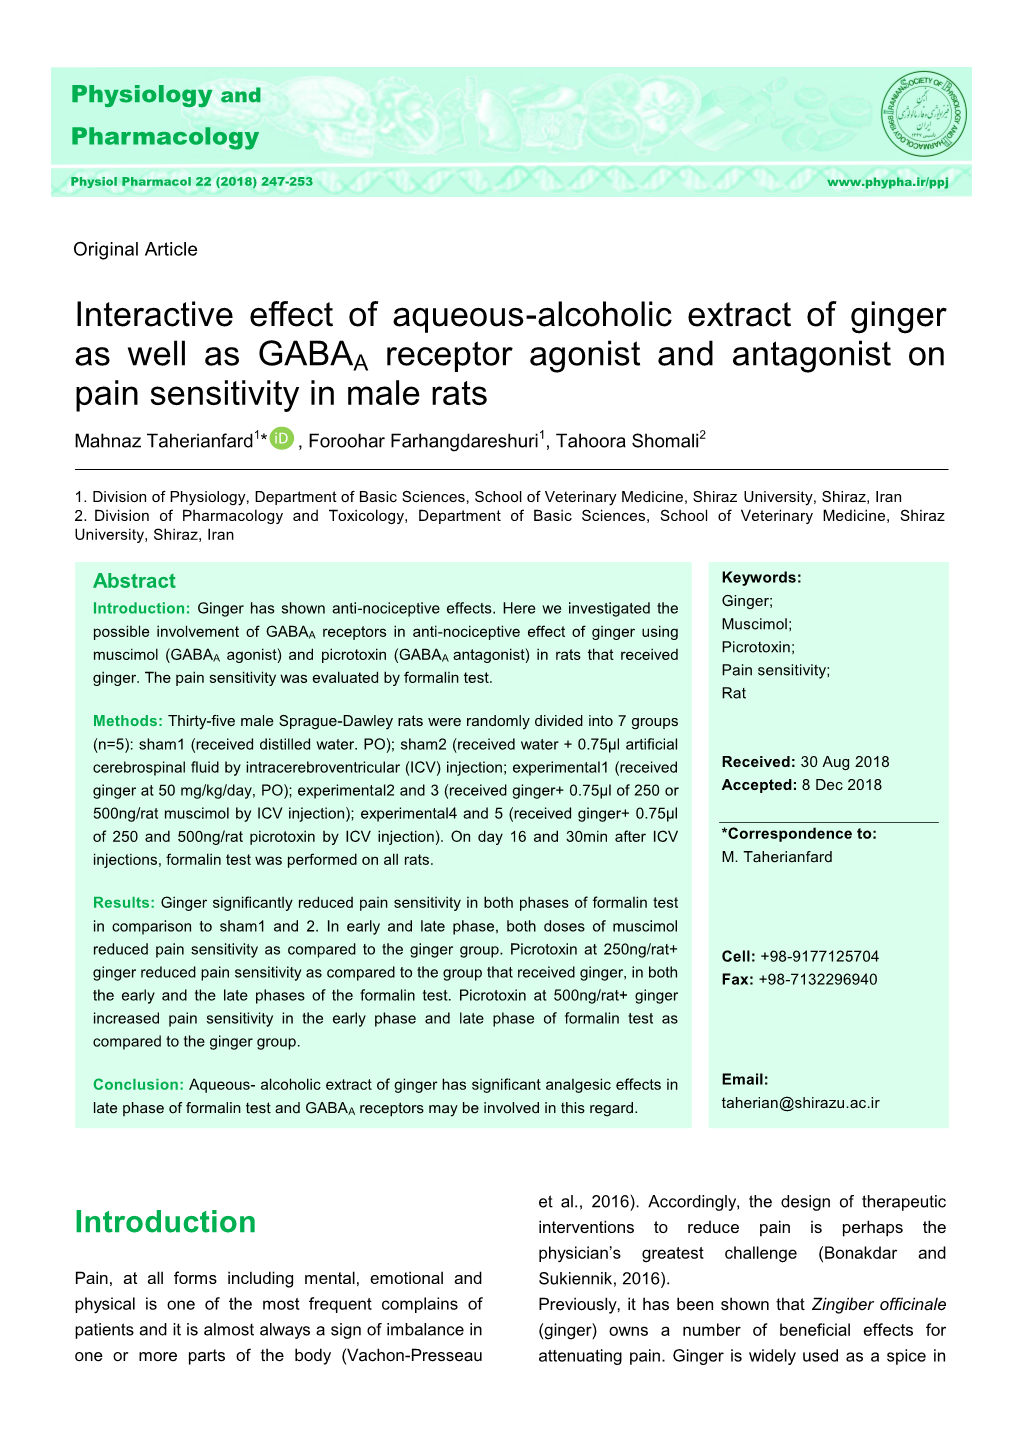 Interactive Effect of Aqueous-Alcoholic Extract of Ginger As Well As GABA a Receptor Agonist and Antagonist on Pain Sensitivity